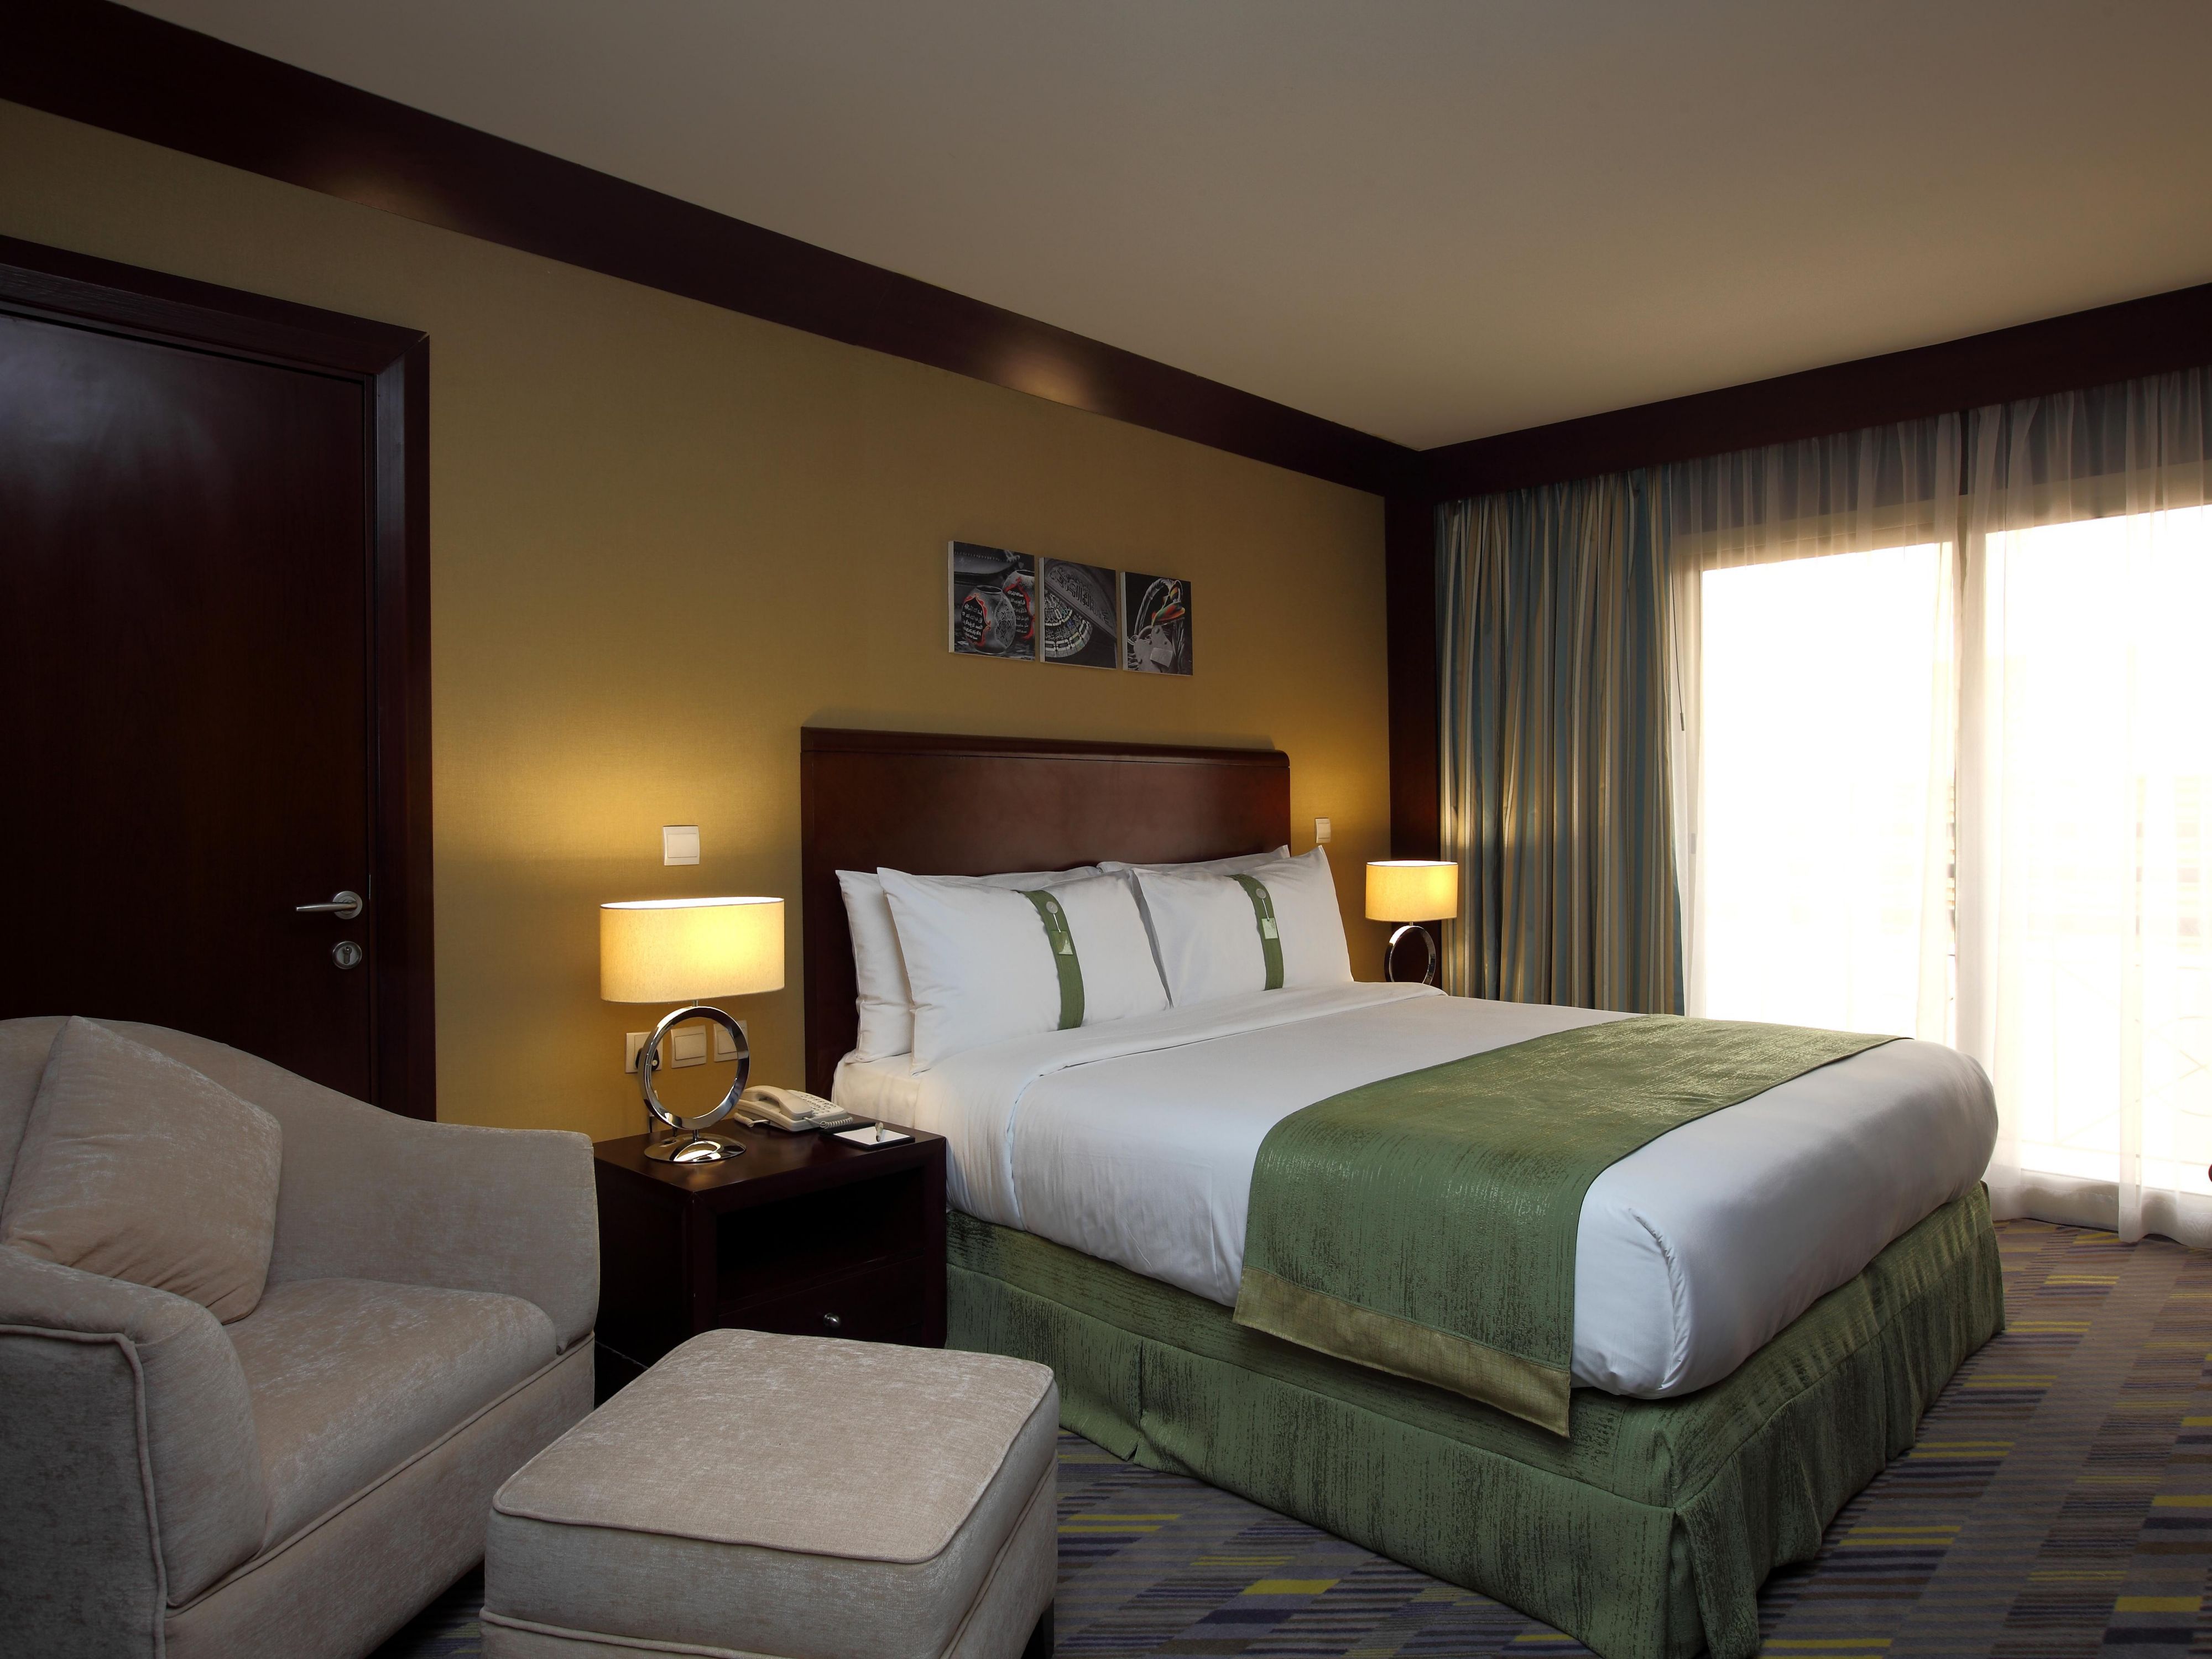 Our rooms are cleverly designed with comfy beds, desk space, 43-inch LCD TVs, high-speed internet access, and streamlined bathrooms. Blackout curtains and a choice of pillows guarantee a good night’s sleep. You'll love big windows that allow plenty of natural light in our rooms.